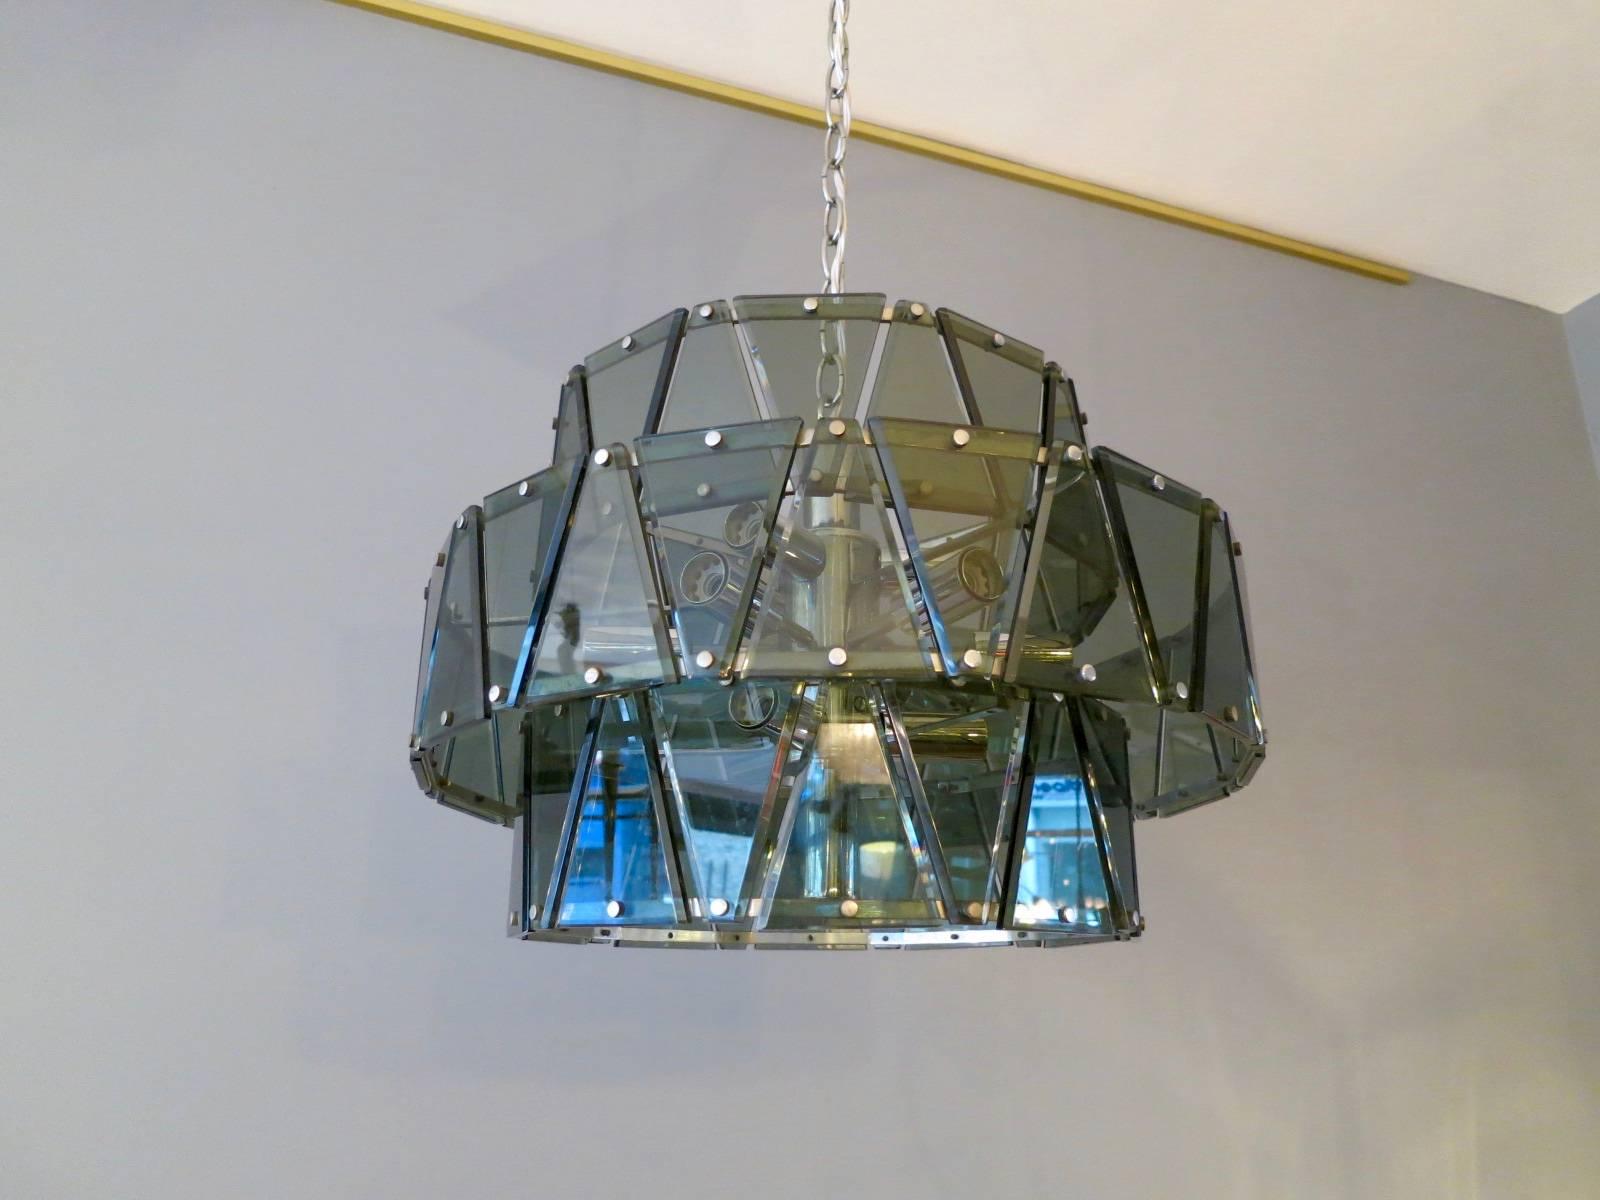 A three tiered chandelier attributed to Zero Quattro with green bevelled triangular pieces of glass on a chrome frame

circa 1960s

Measures: 50cm diameter x 30cm height (without chain) drop with chain 105cm.